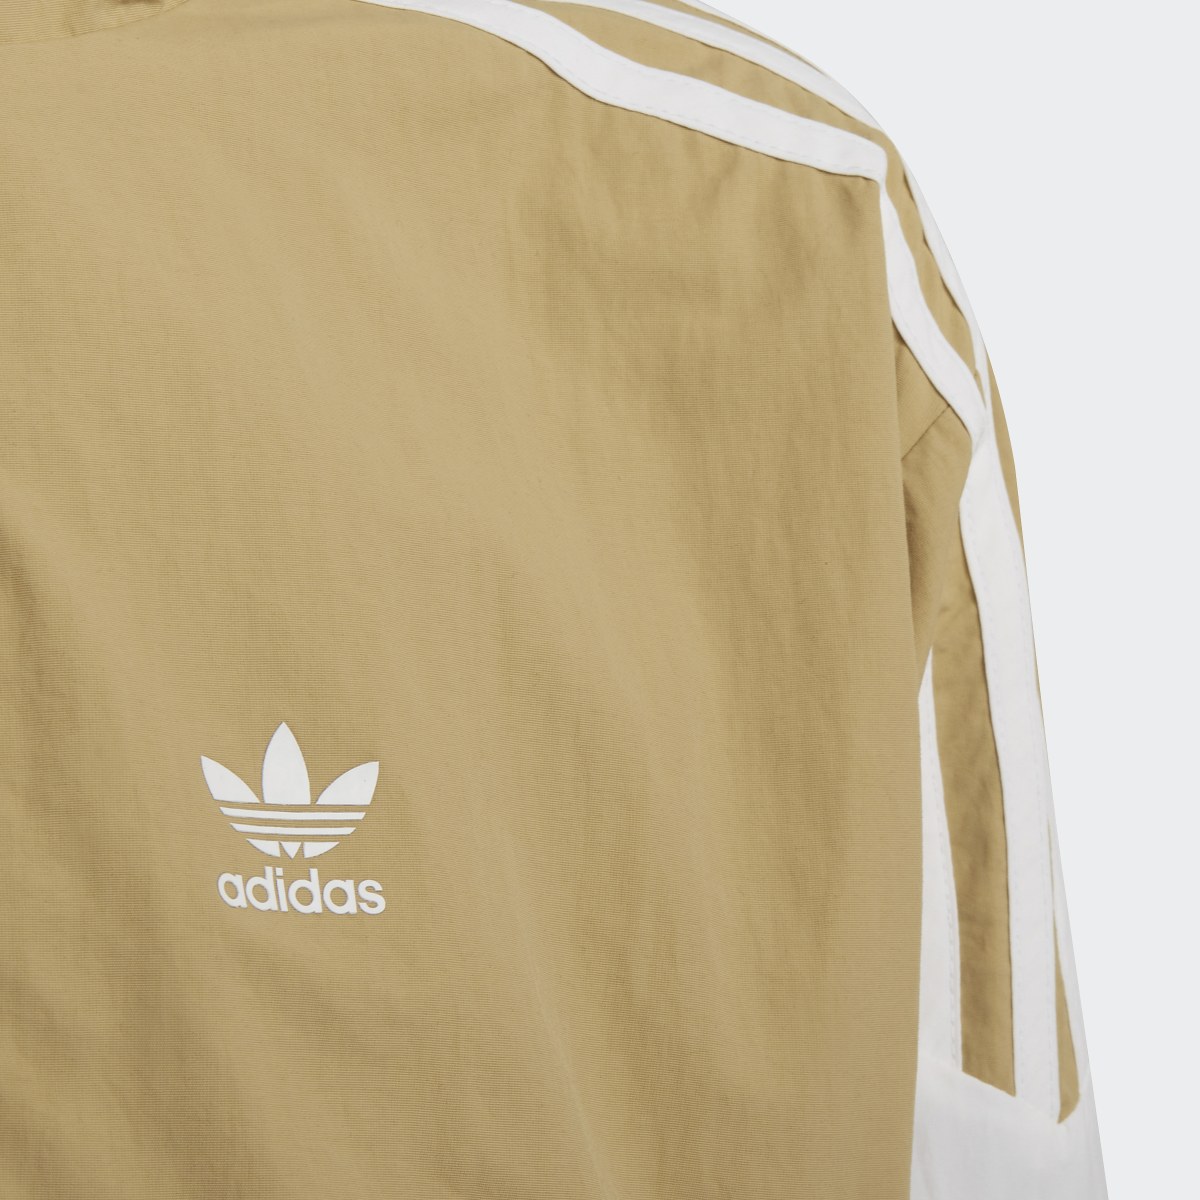 Adidas Woven Track Top. 4